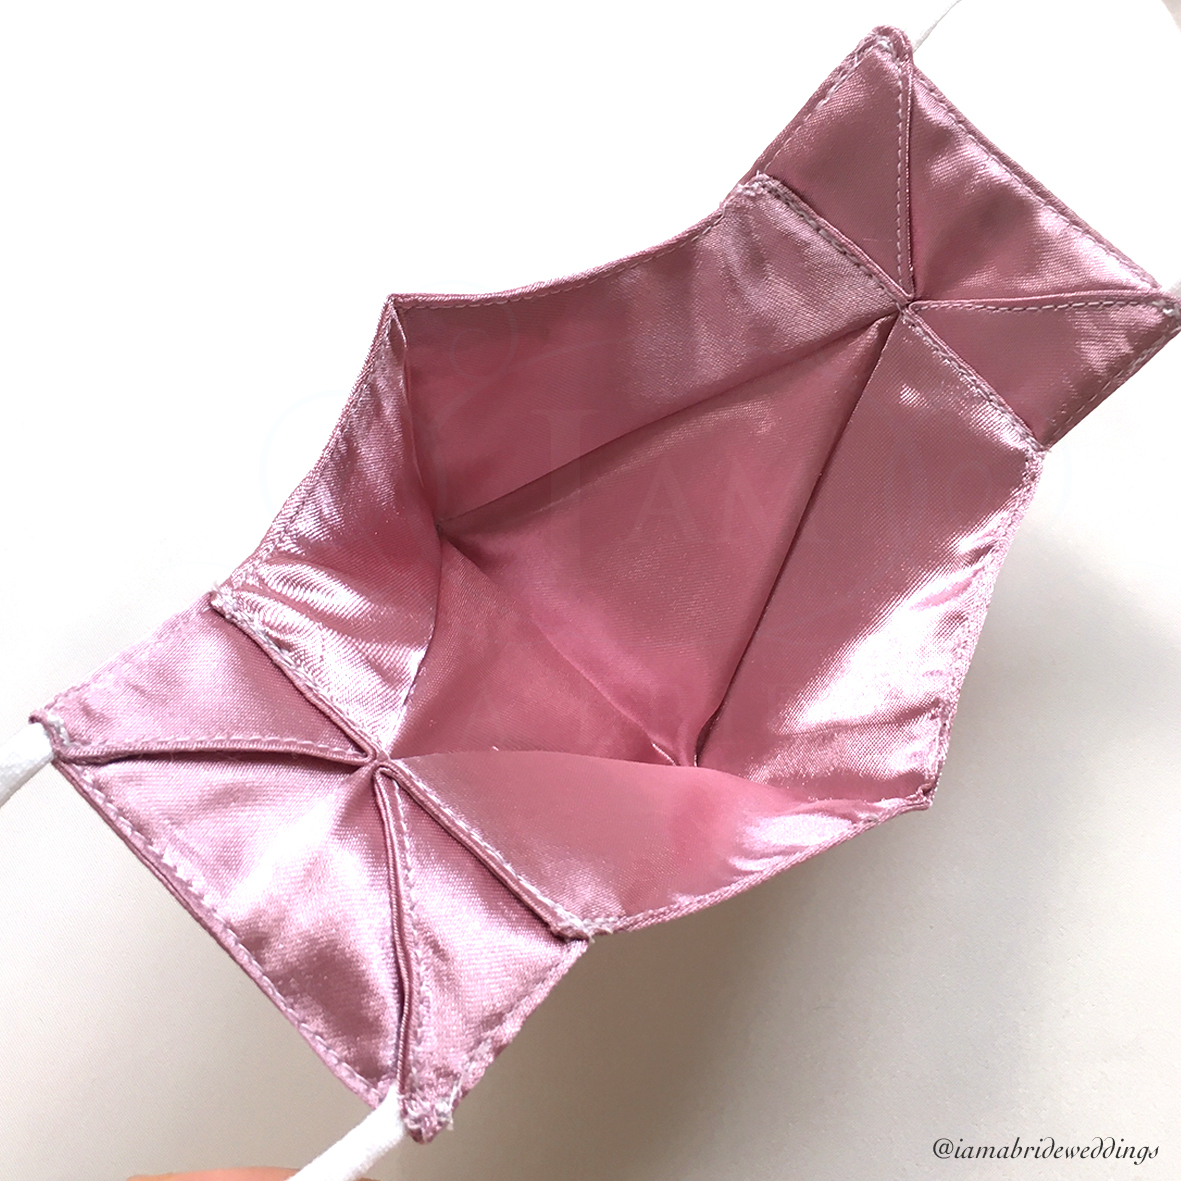 3D Breathable Origami Face Mask - French Rose Satin Duckbill Lady Men Facemask 05